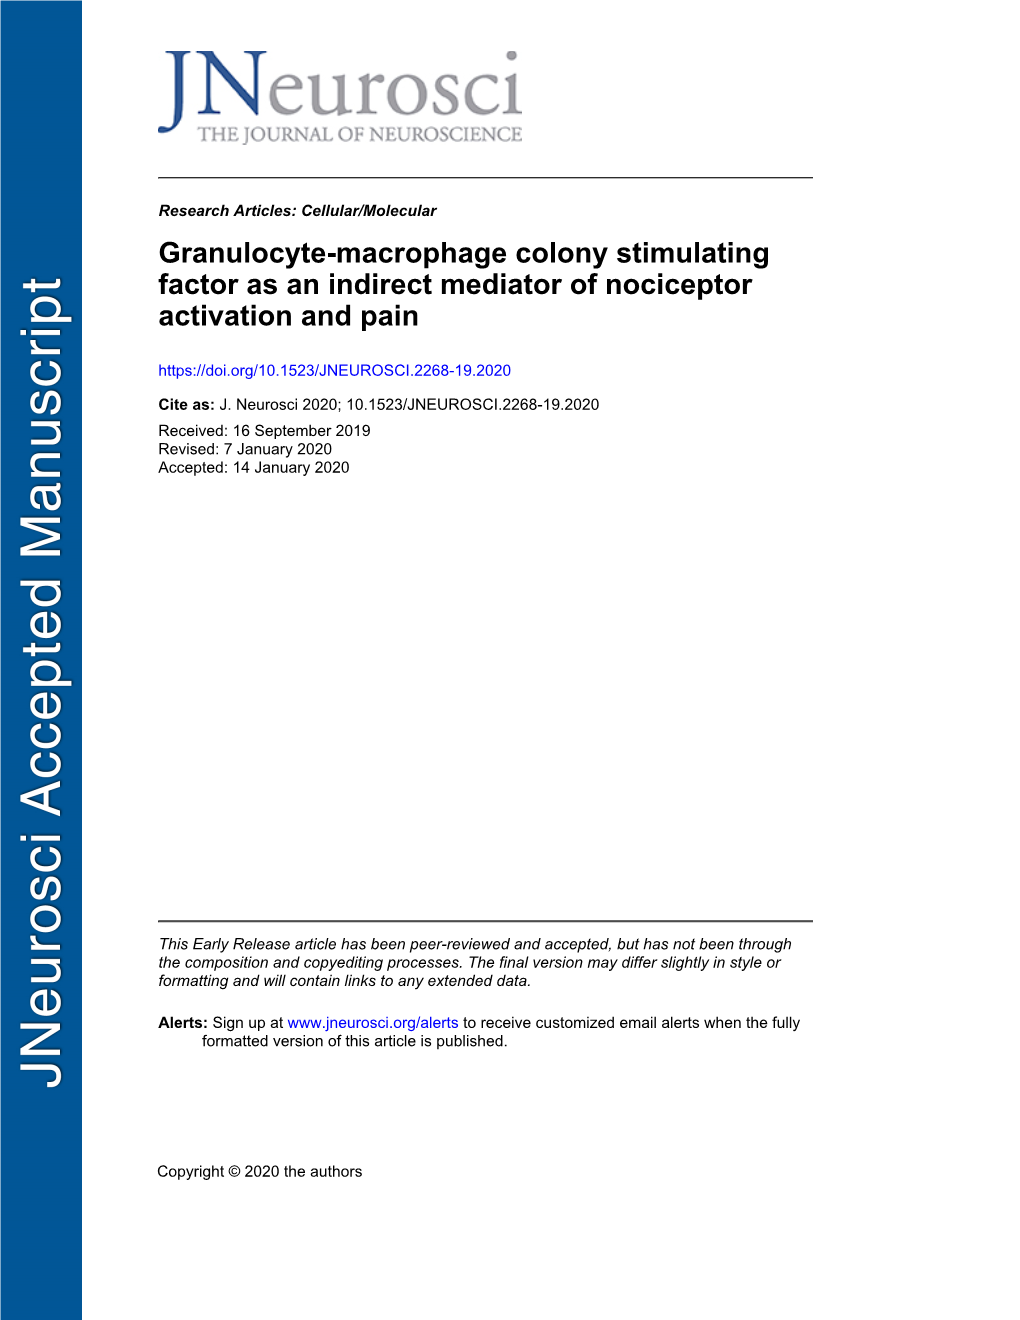 Granulocyte-Macrophage Colony Stimulating Factor As an Indirect Mediator of Nociceptor Activation and Pain